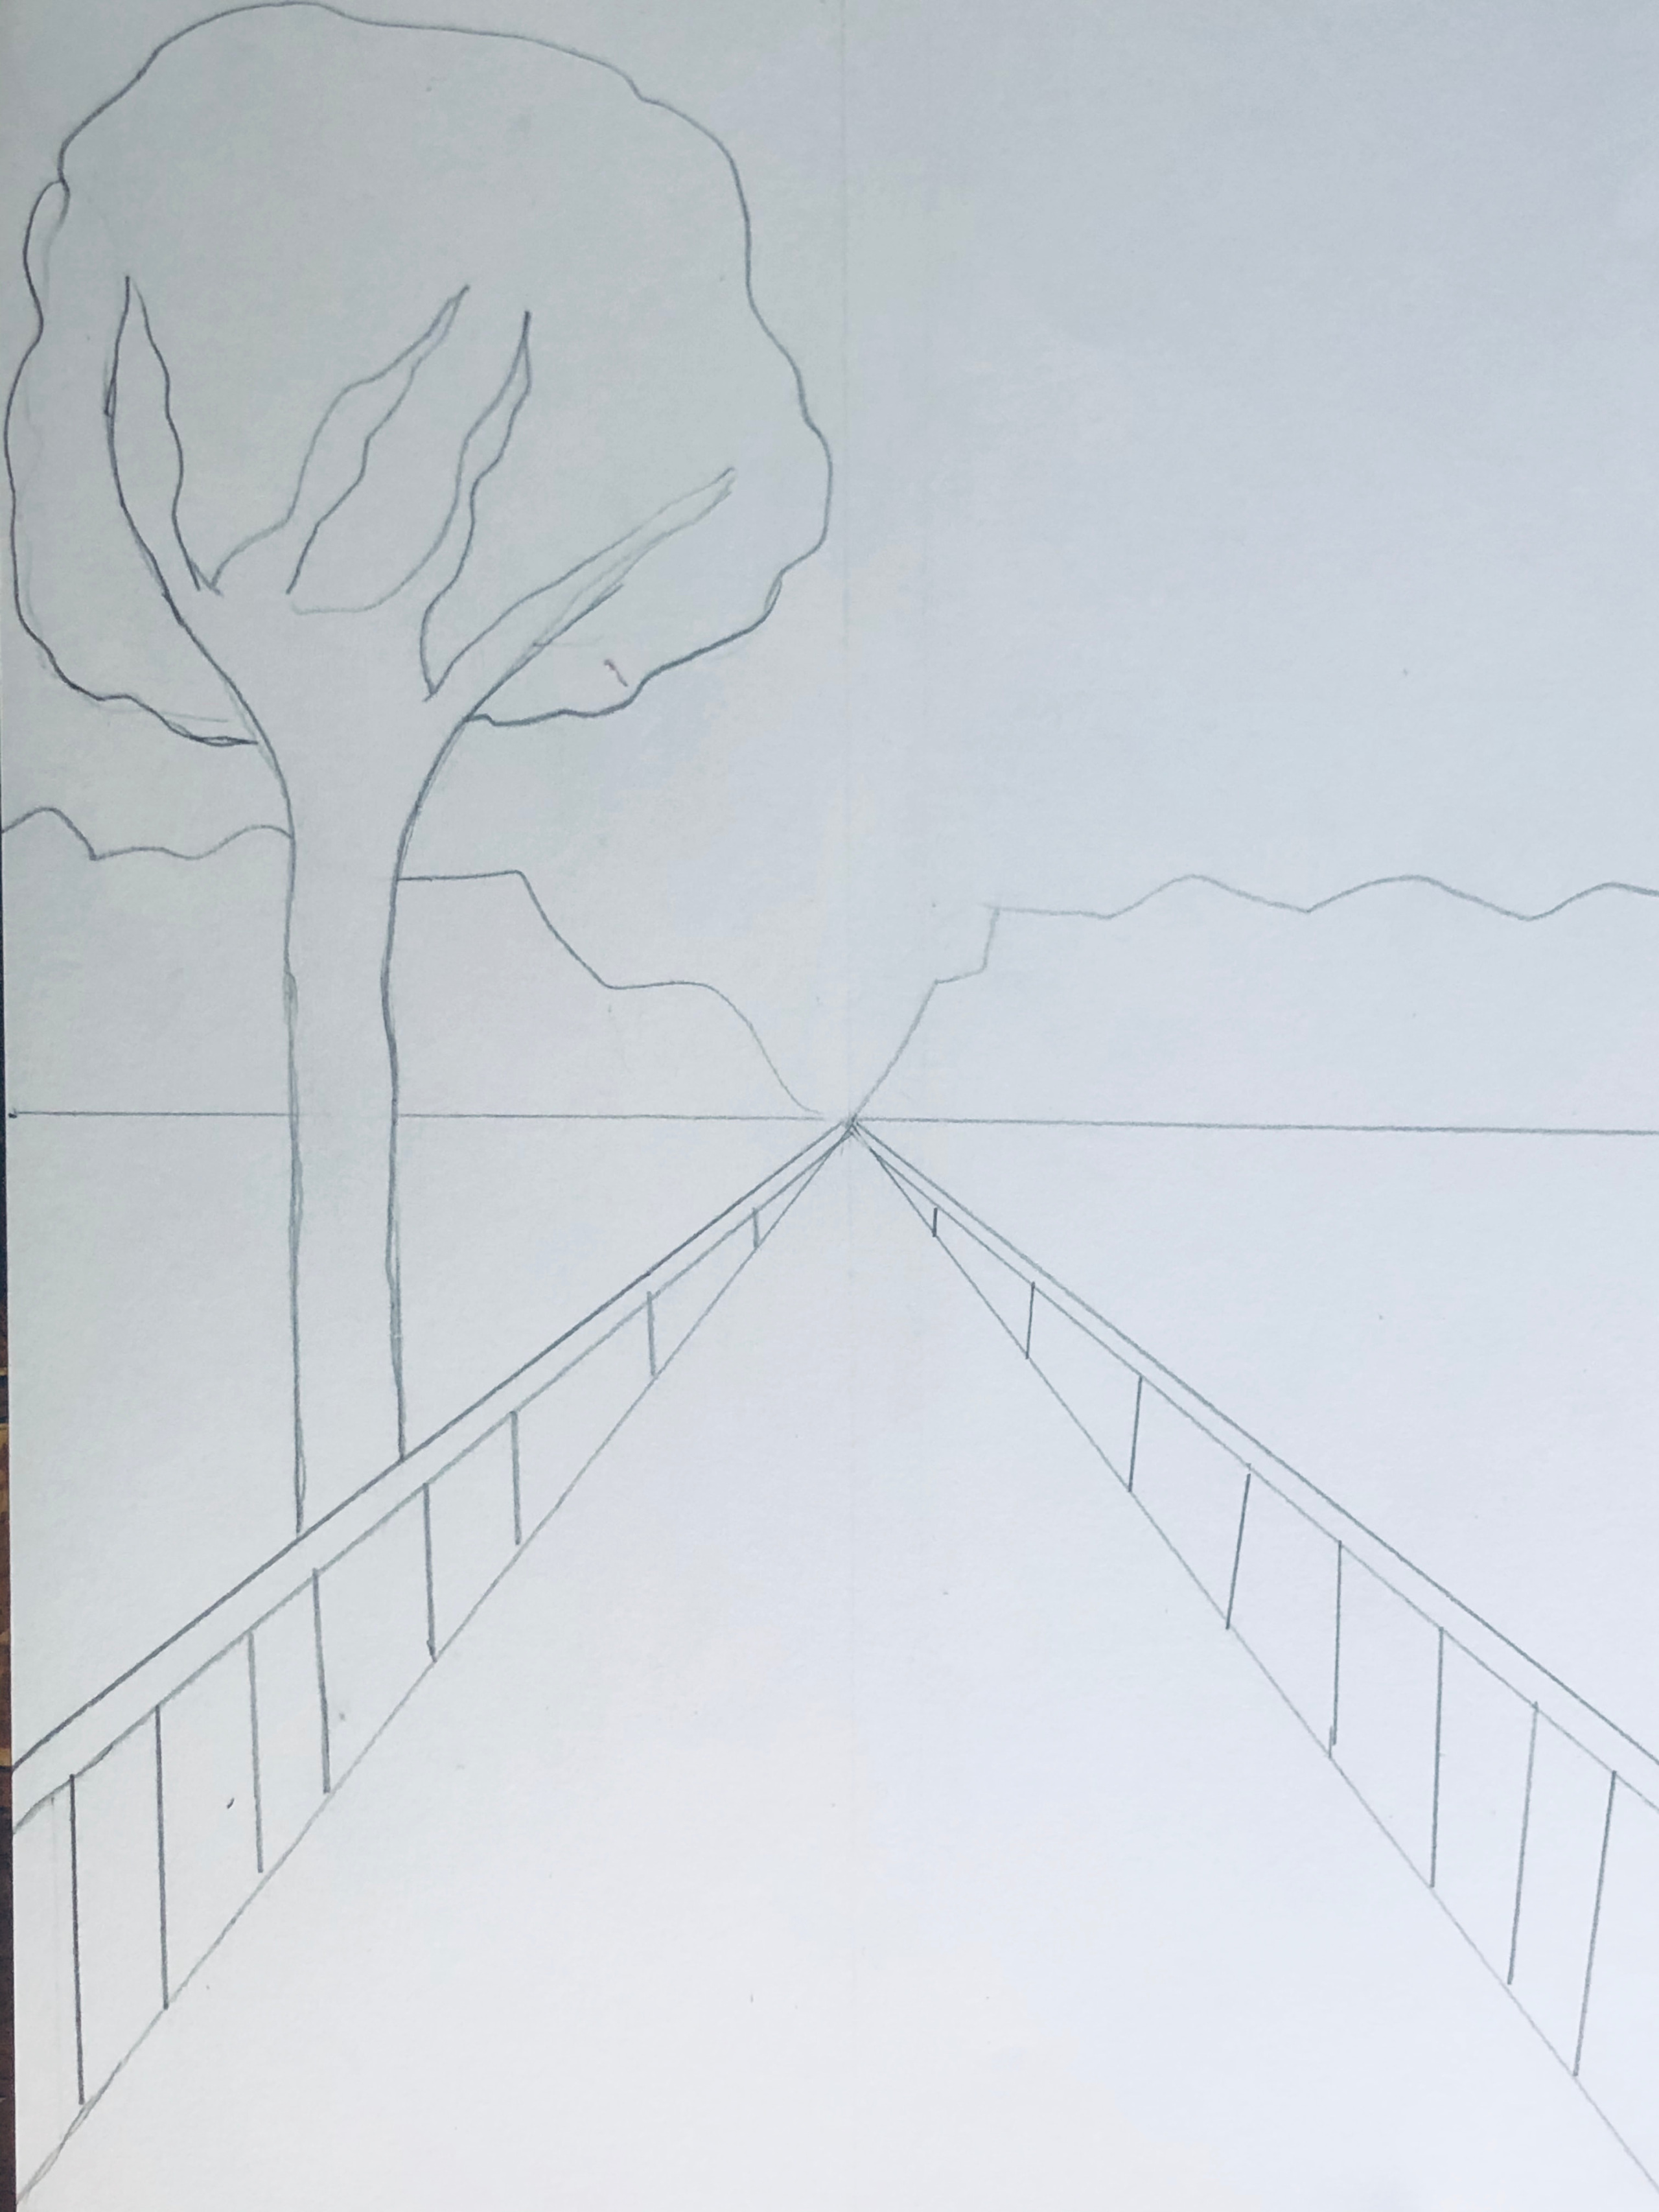 5 great Exercises to learn Perspective Drawing the easy Way